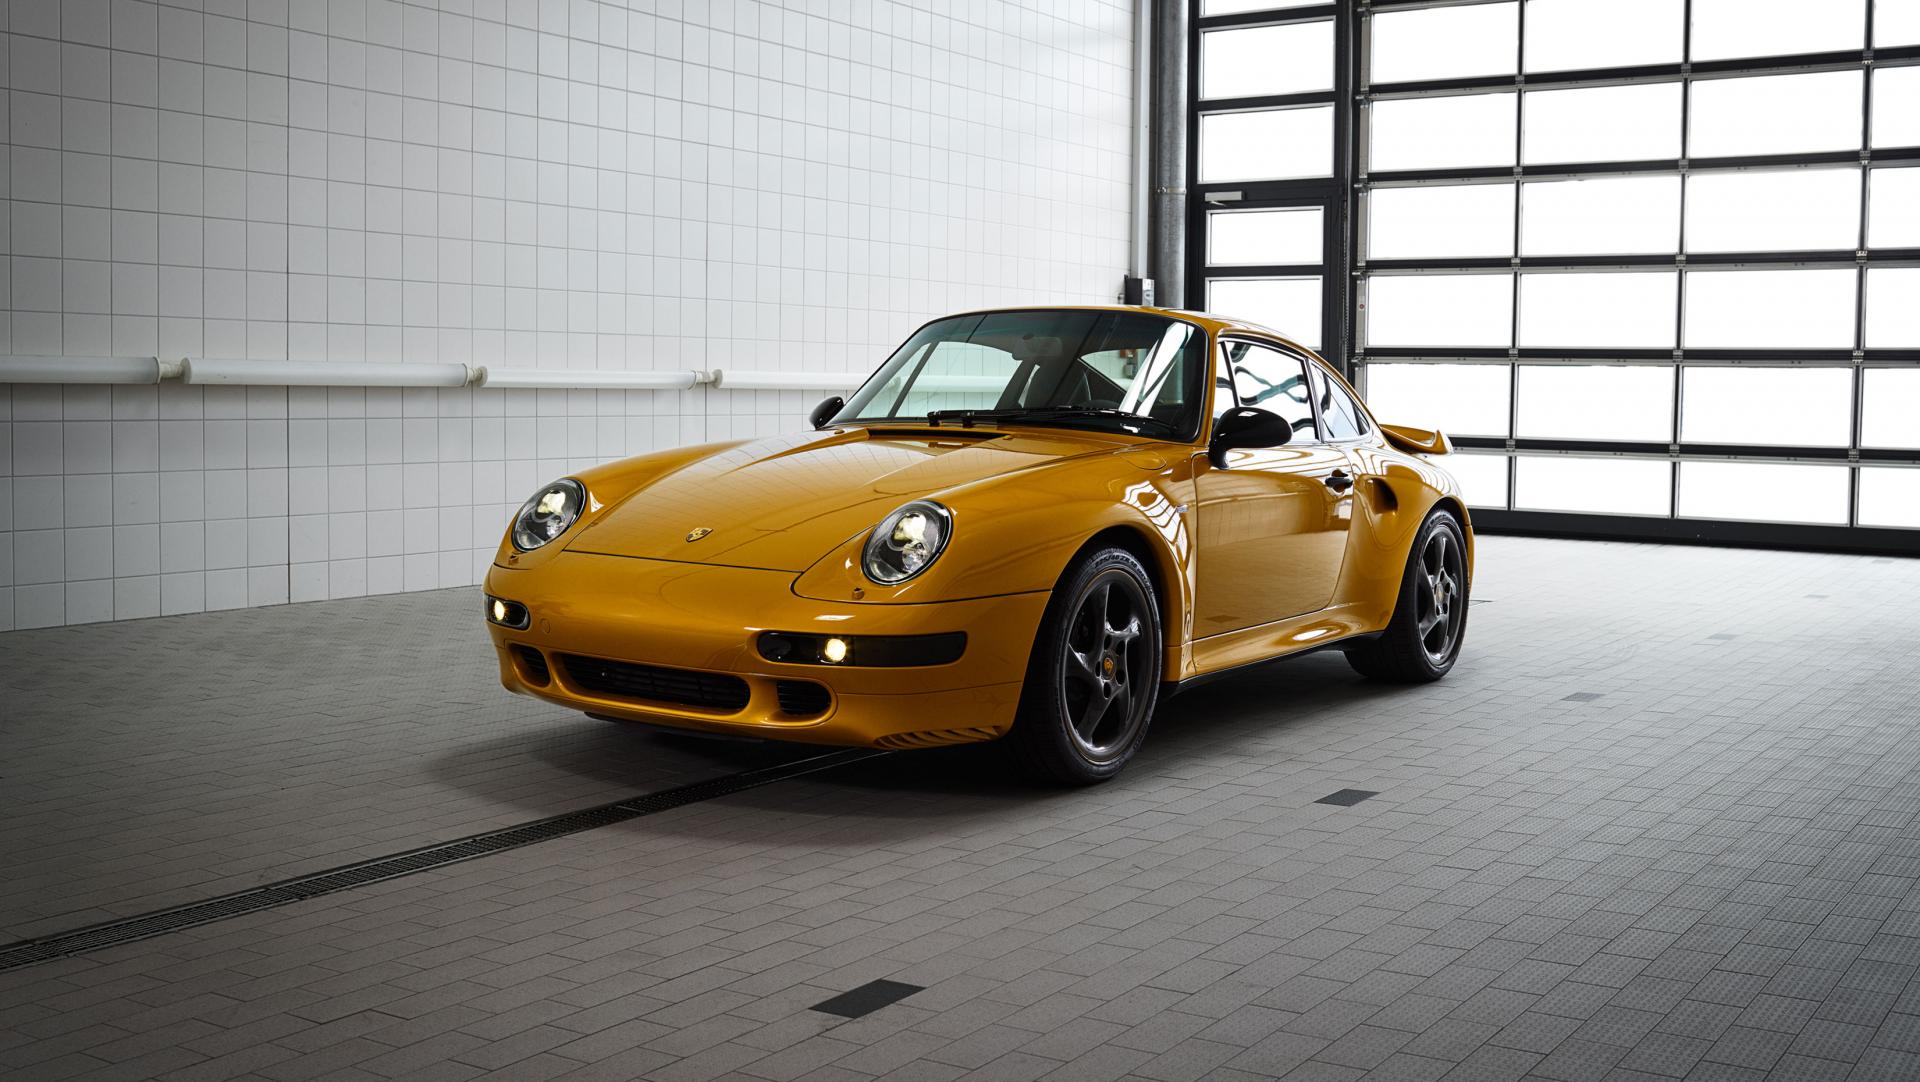 High 993 turbo the reveal classic project gold 2018 porsche ag 1 